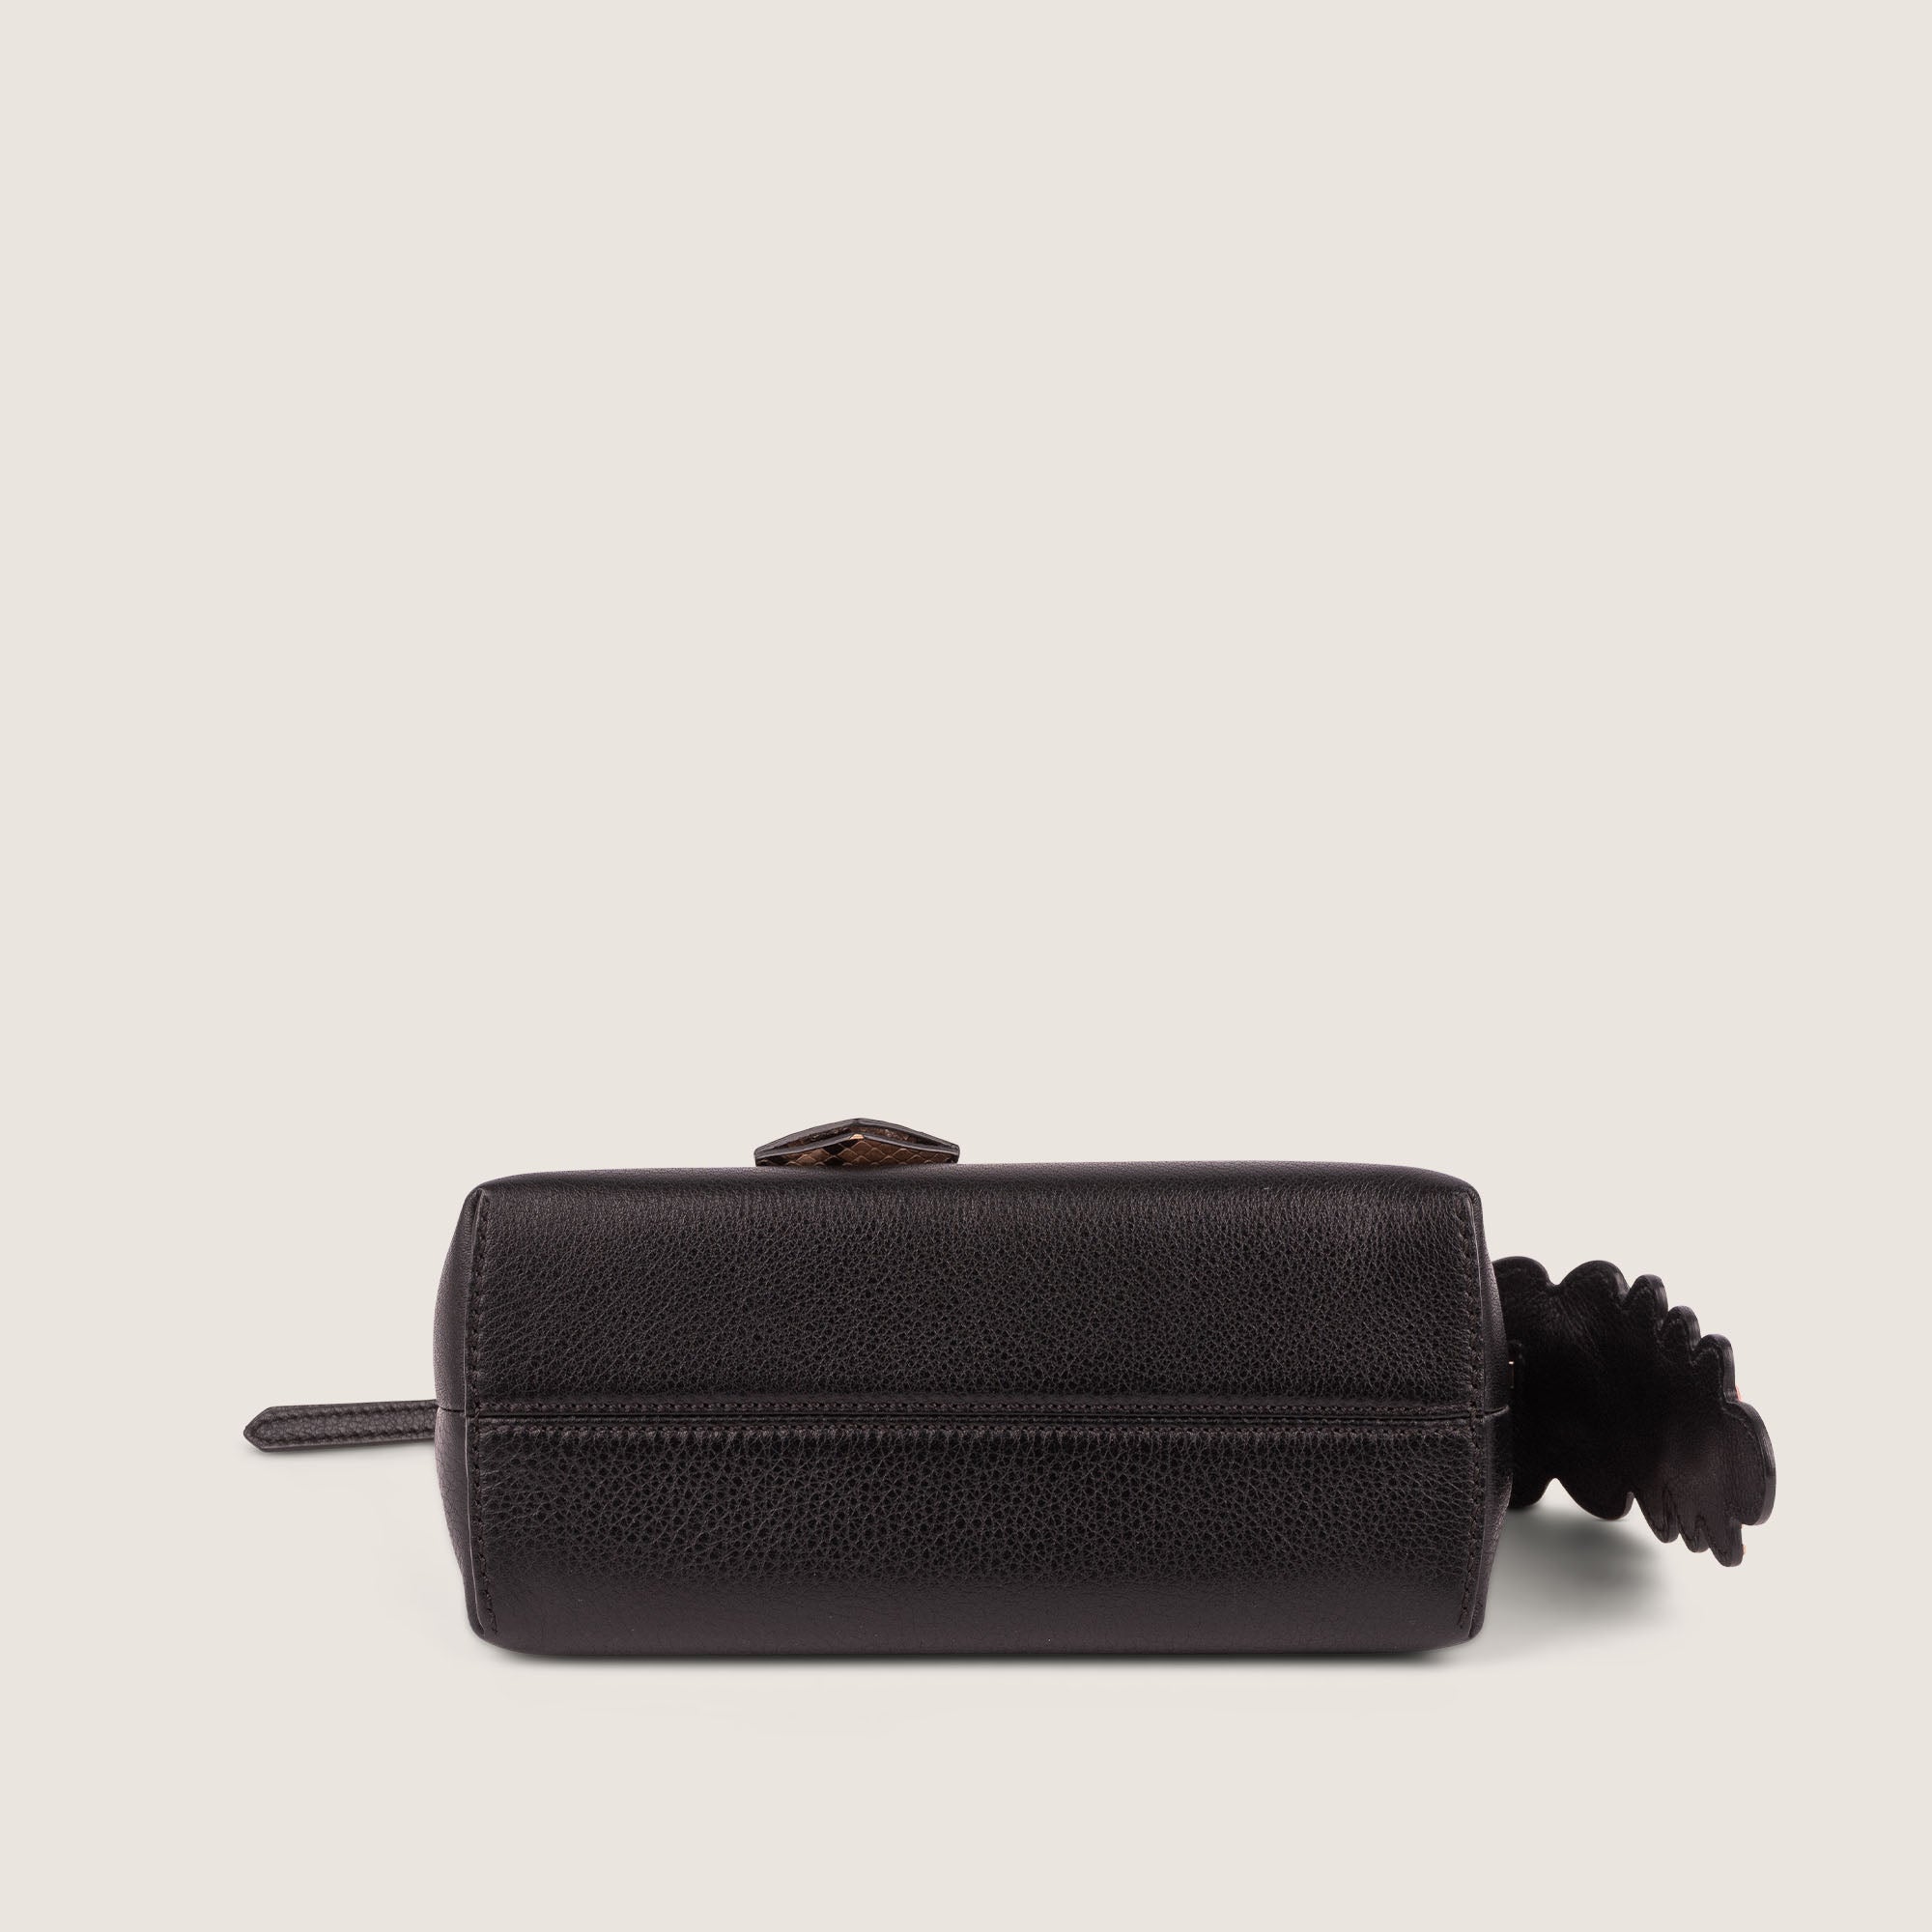 Mini By The Way Bag - FENDI - Affordable Luxury image